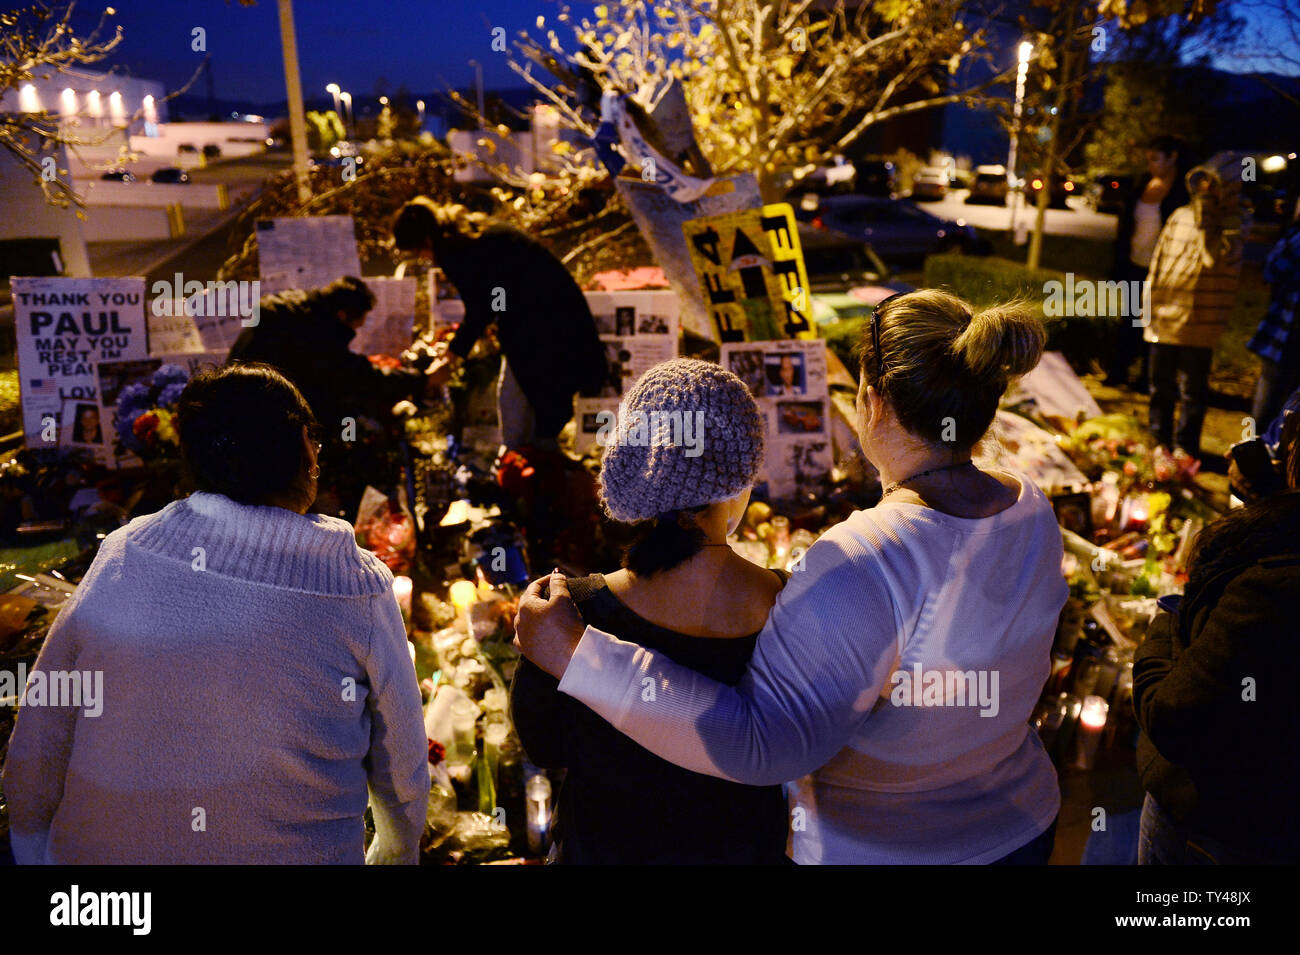 Fans gather at a makeshift memorial to pay respects at the site of the fiery car accident in which actor Paul Walker was killed in Santa Clarita, California, on December 4, 2013. Fans and fellow actors mourned the death of Paul Walker, who died in a fiery car crash on Saturday, December 1, 2013. Walker, 40, who was best known as undercover agent Brian O'Connor in the 'Fast and Furious' action movies, appeared in all but one of the six movies in the popular franchise, and was a leading protagonist along with Vin Diesel and Michelle Rodriguez. UPI/Jim Ruymen Stock Photo